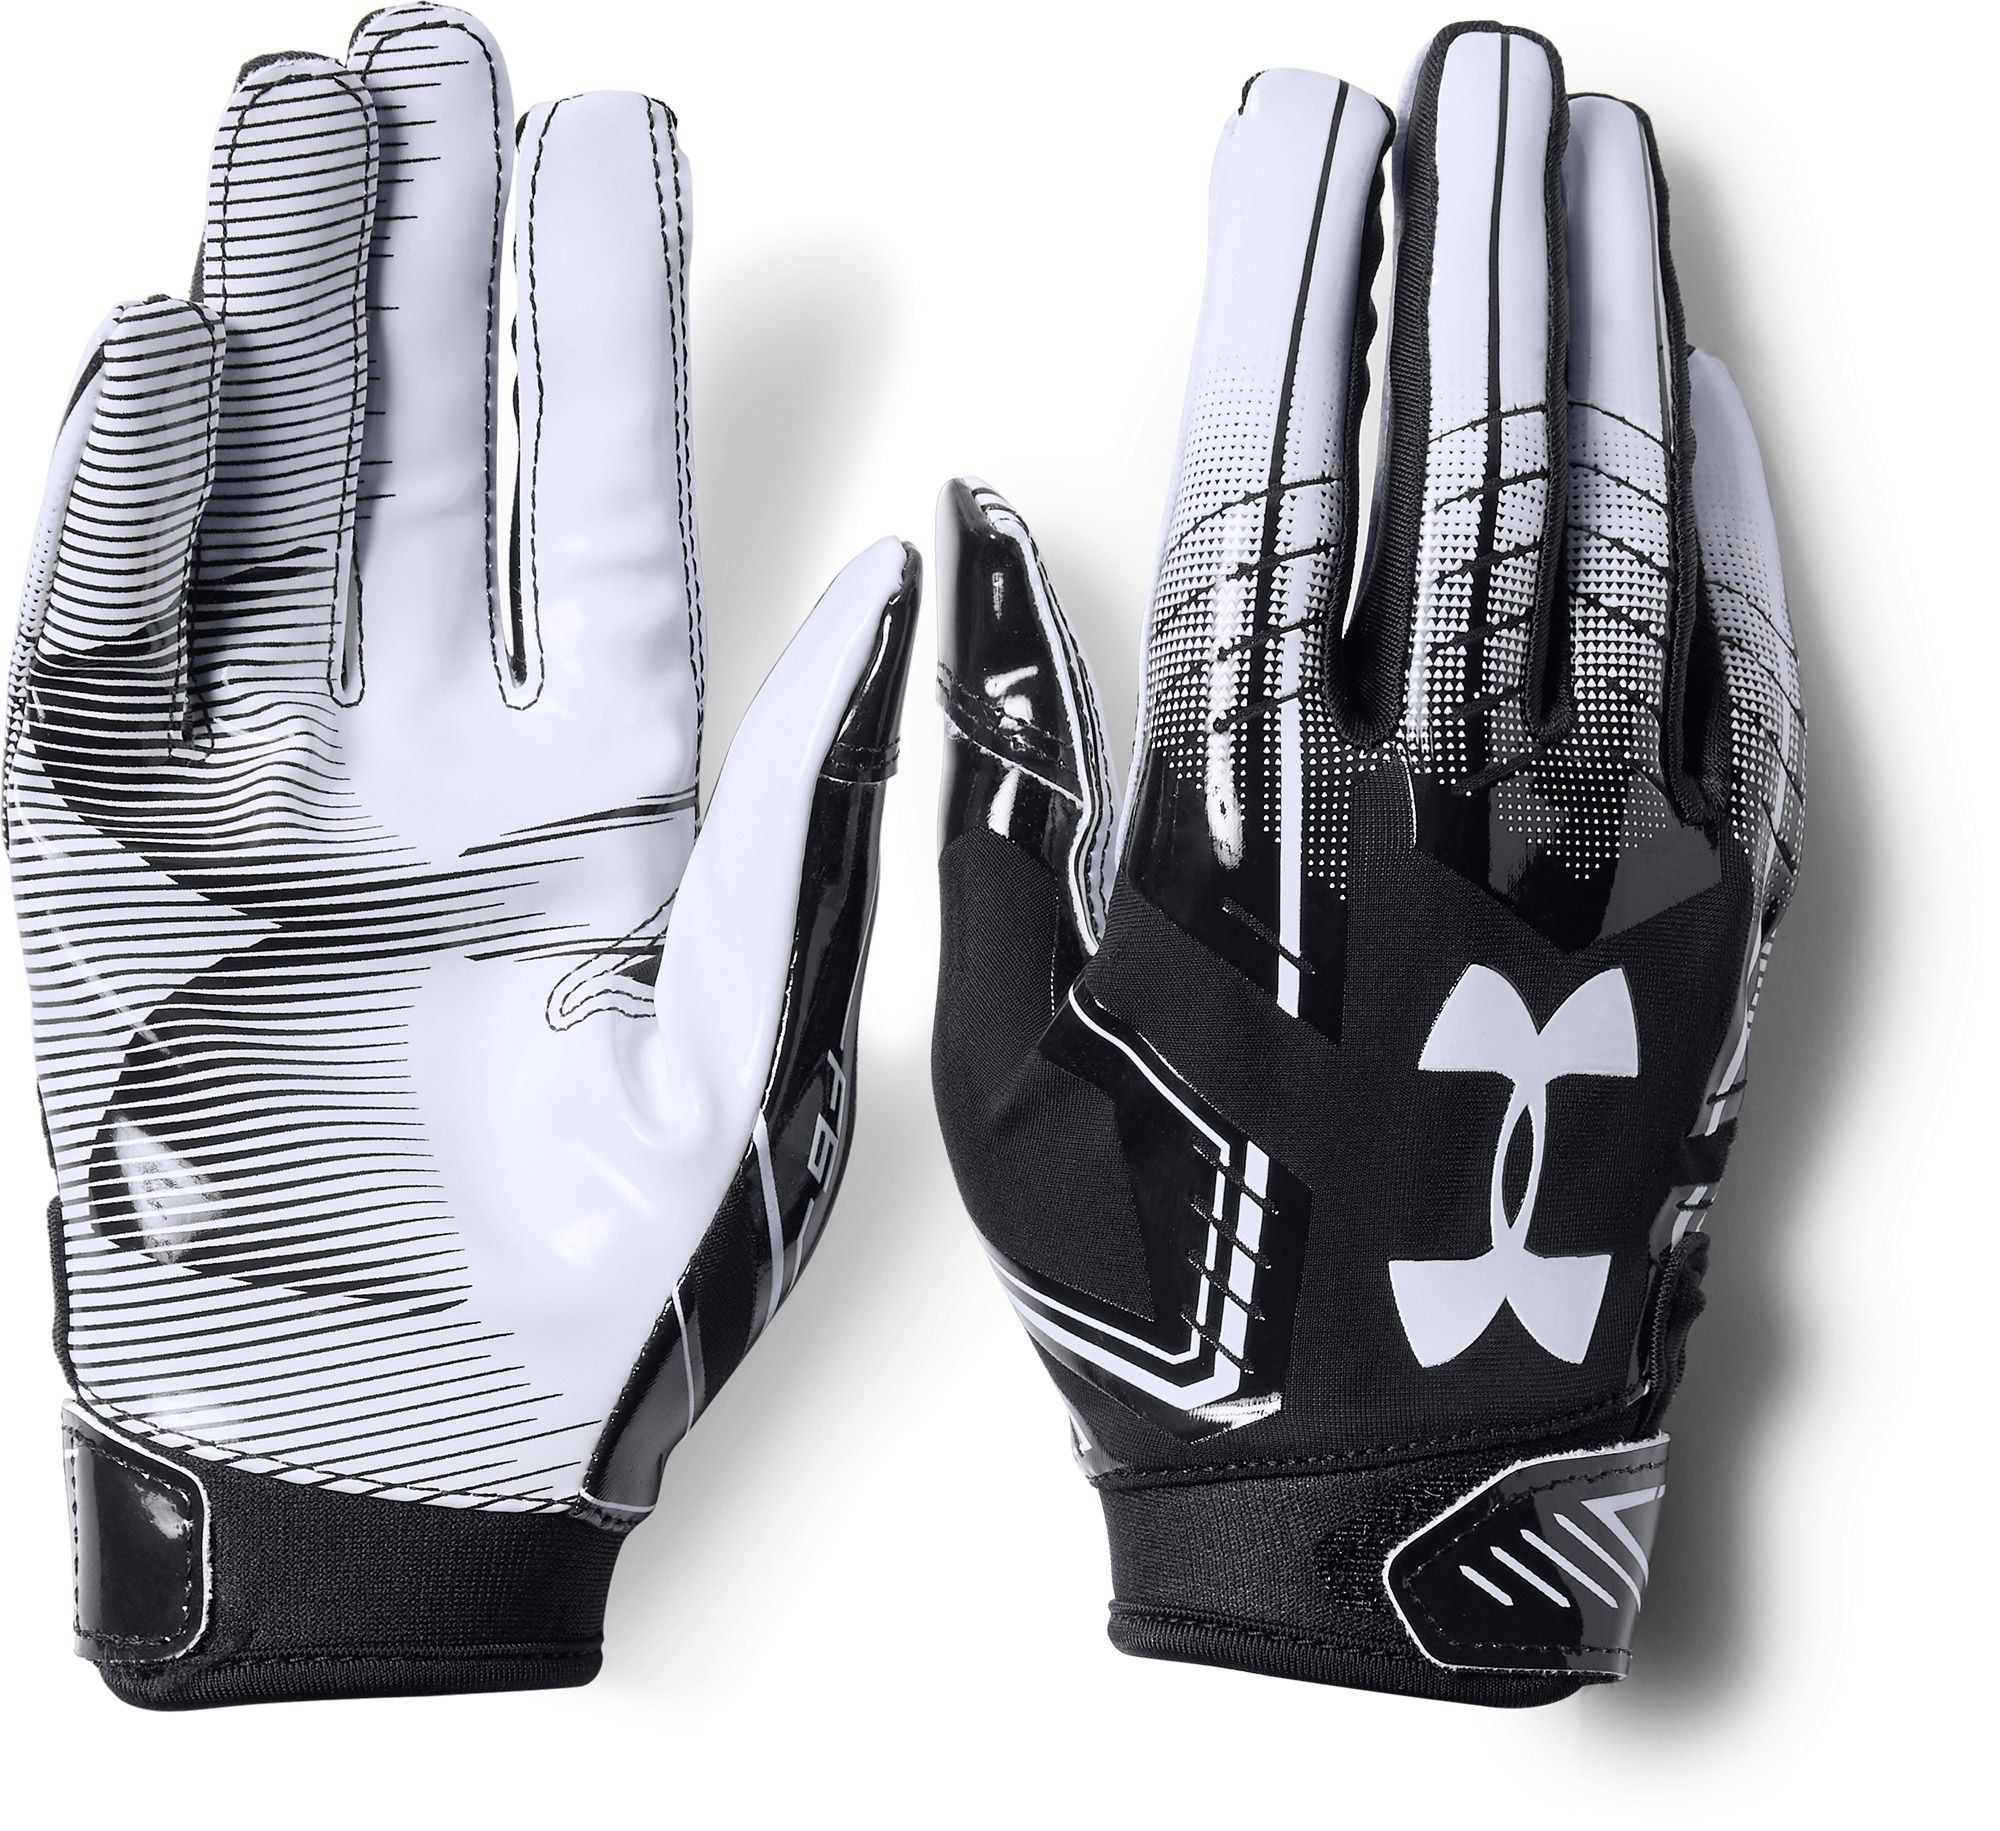 under armor youth football gloves